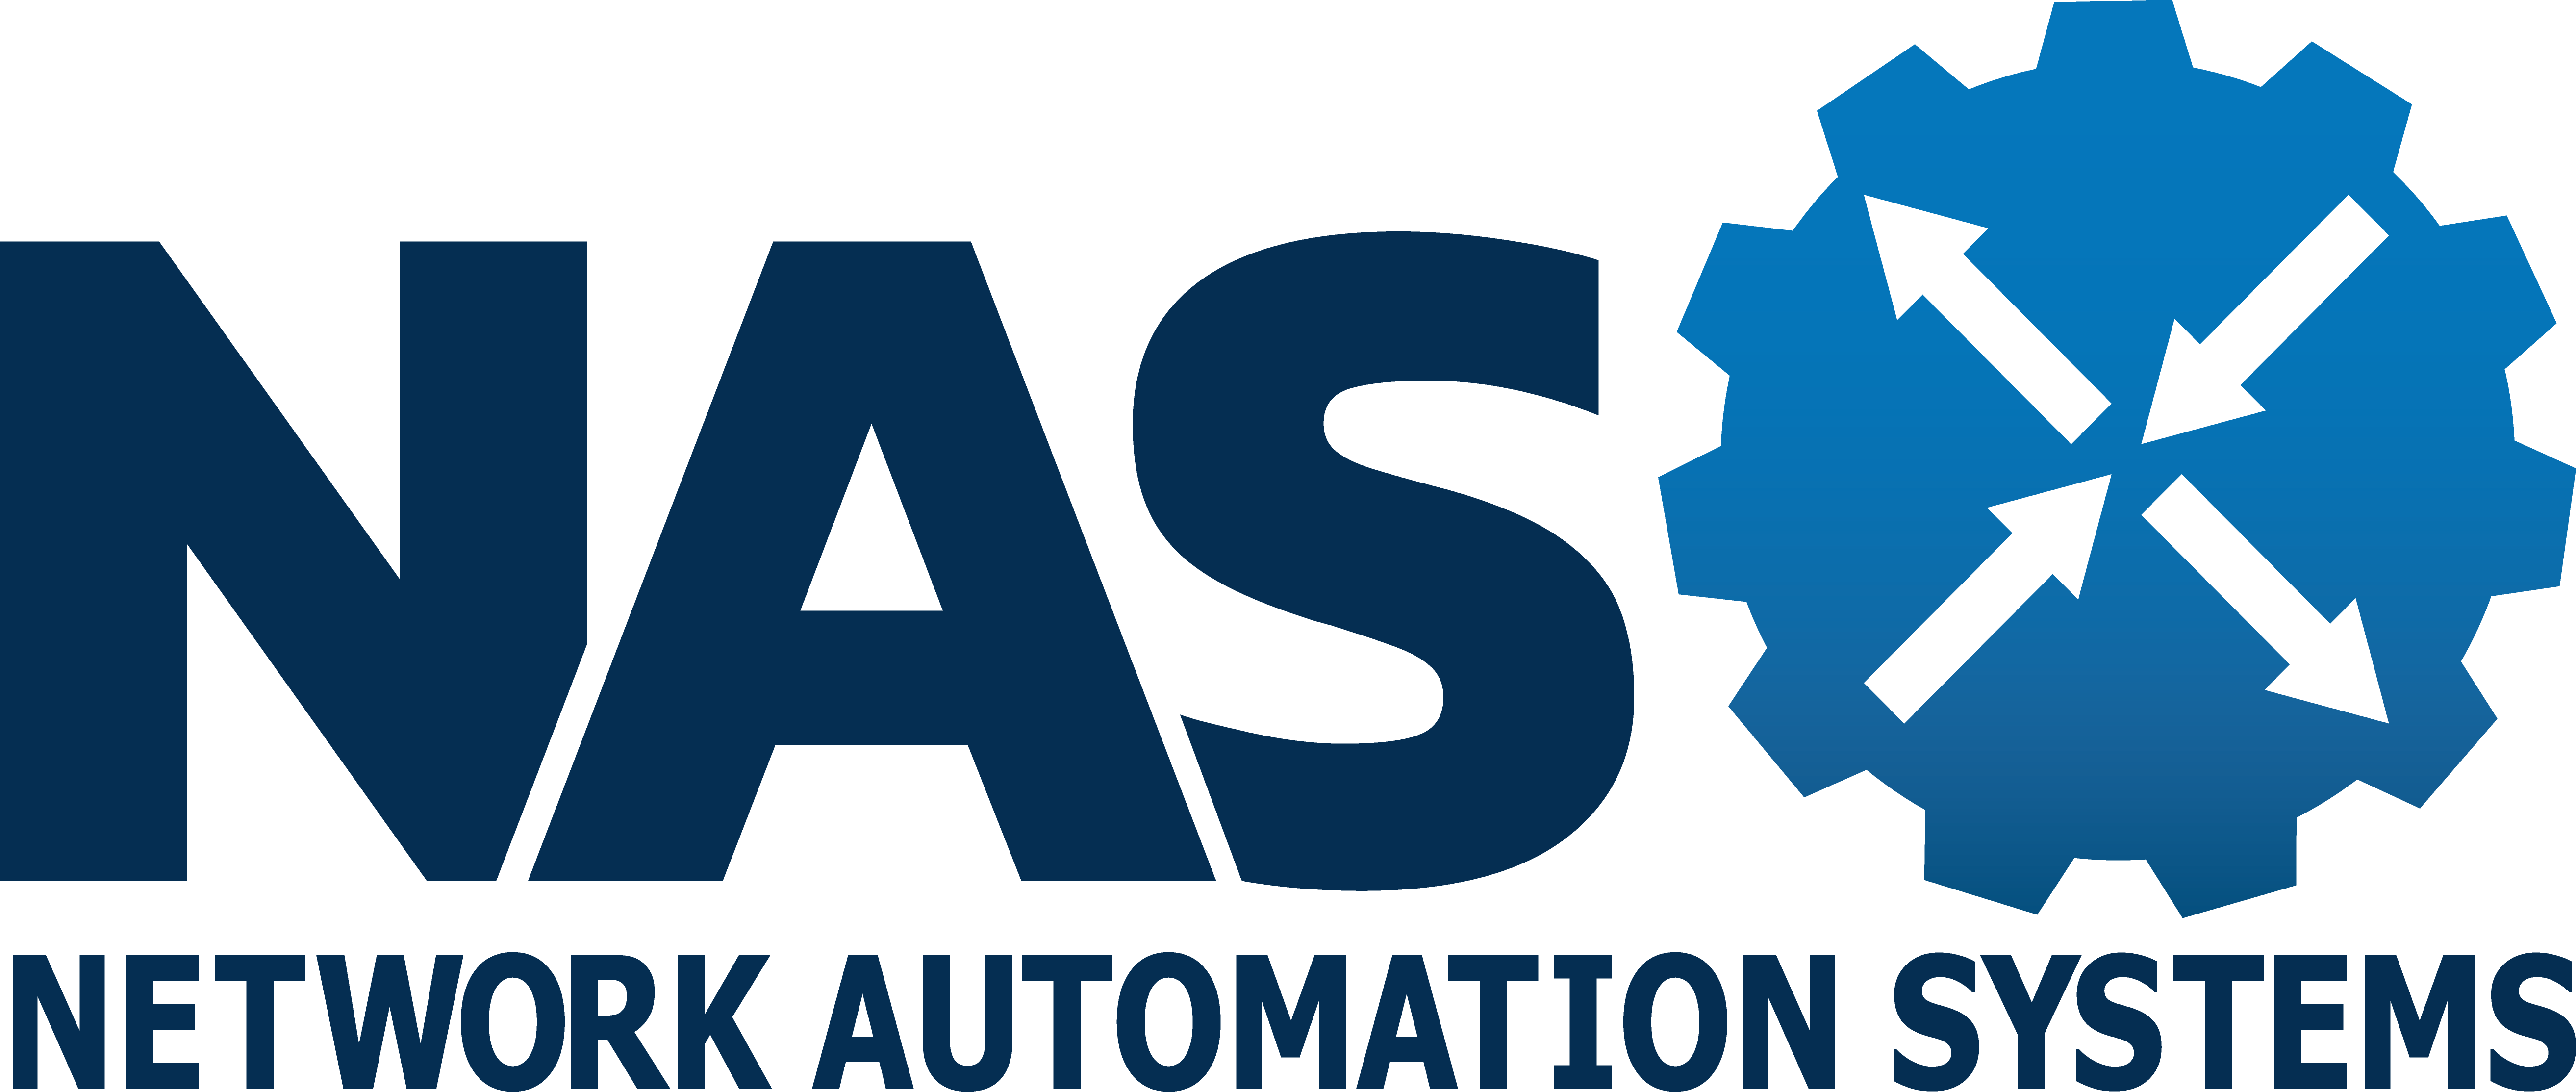 Network Automation Systems, Inc. Logo